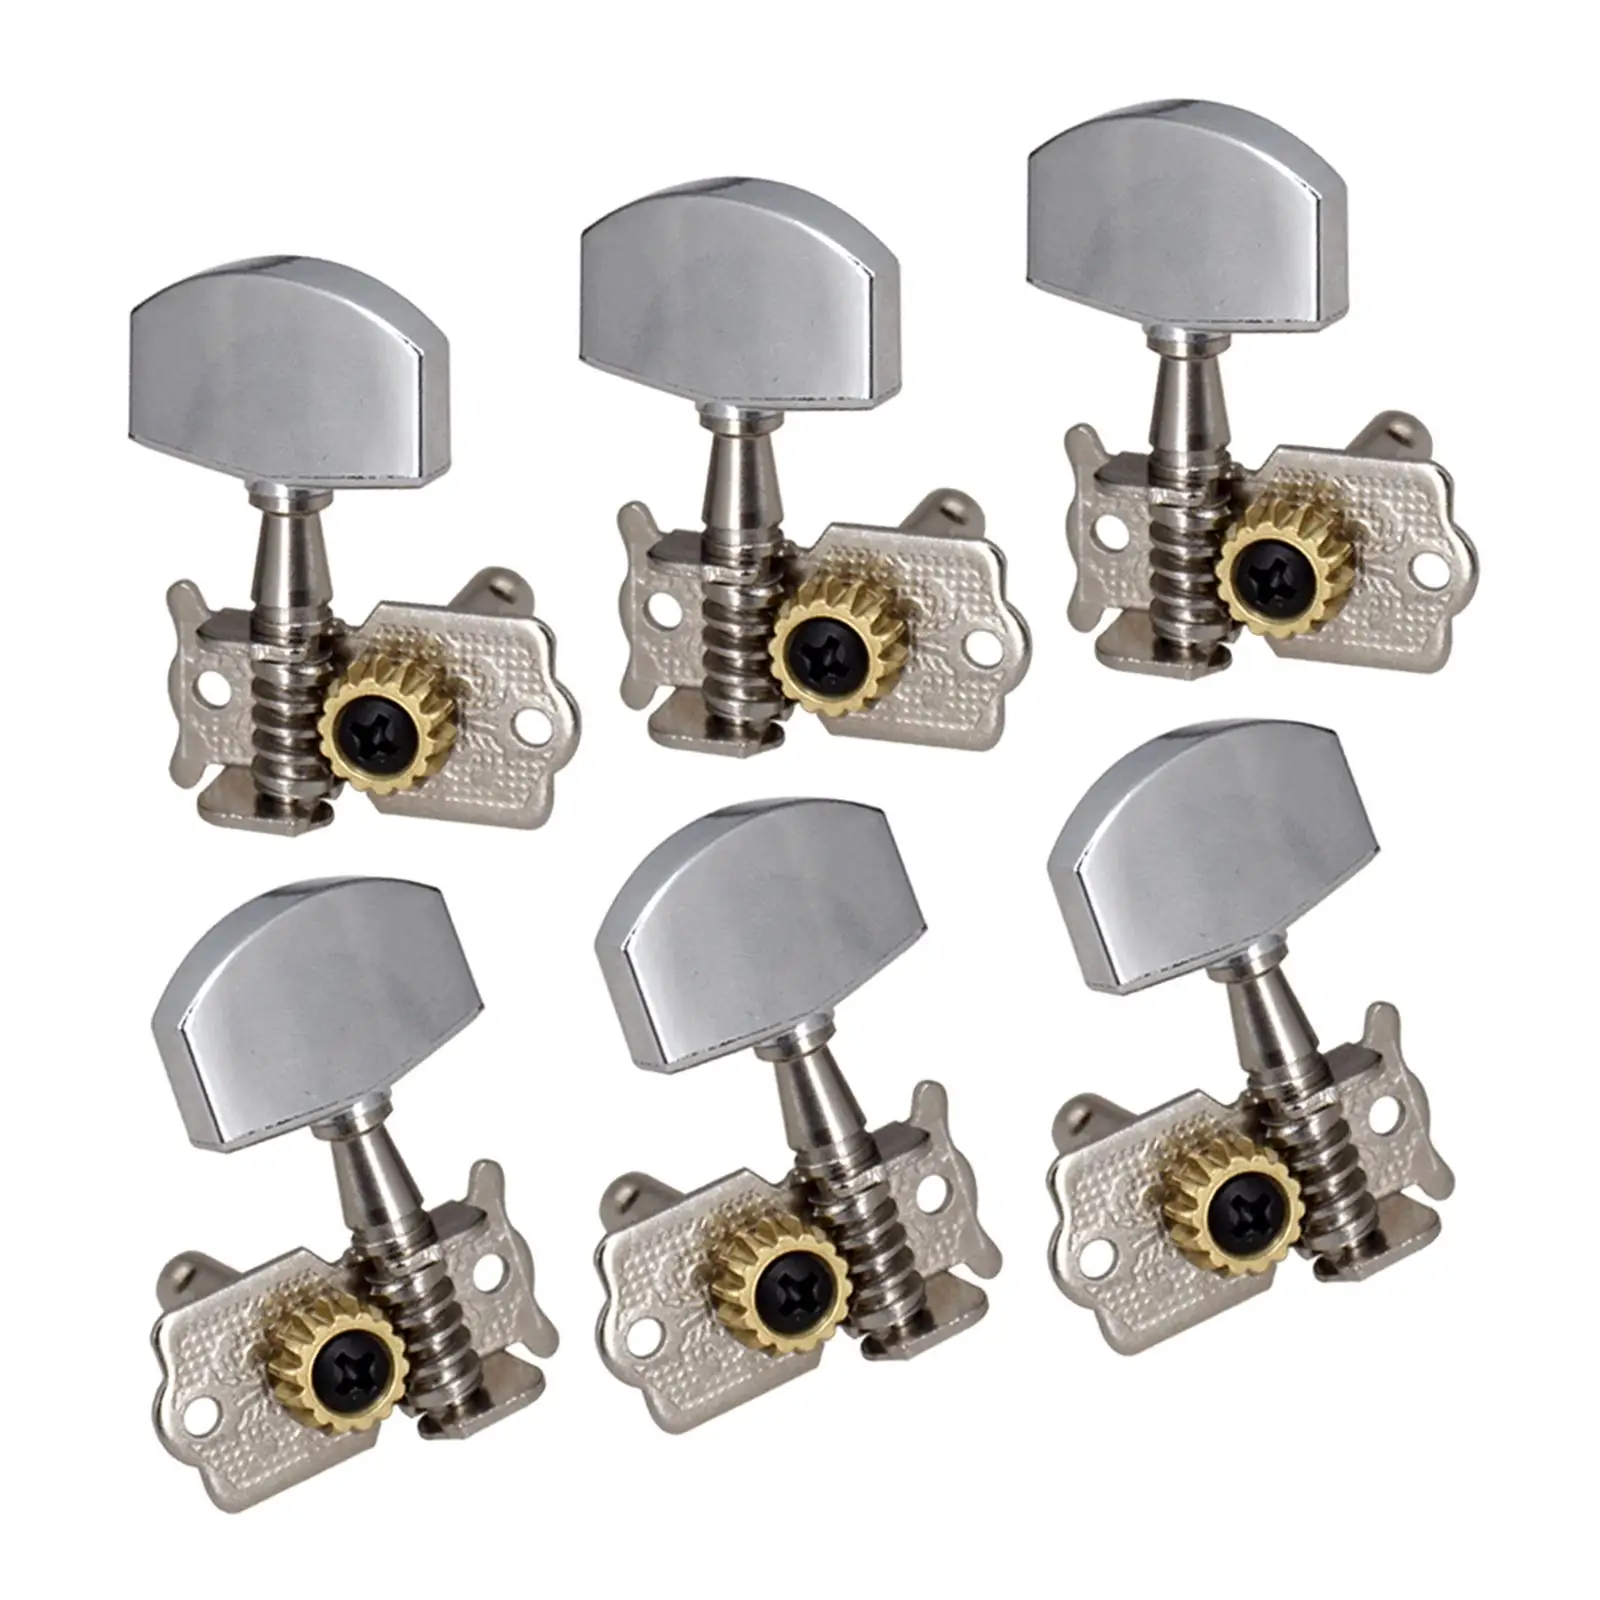 6Pcs Guitar Tuning Peg Tuner Key Peg Knobs Tuners Machine Head for Acoustic Guitar Parts Replacement